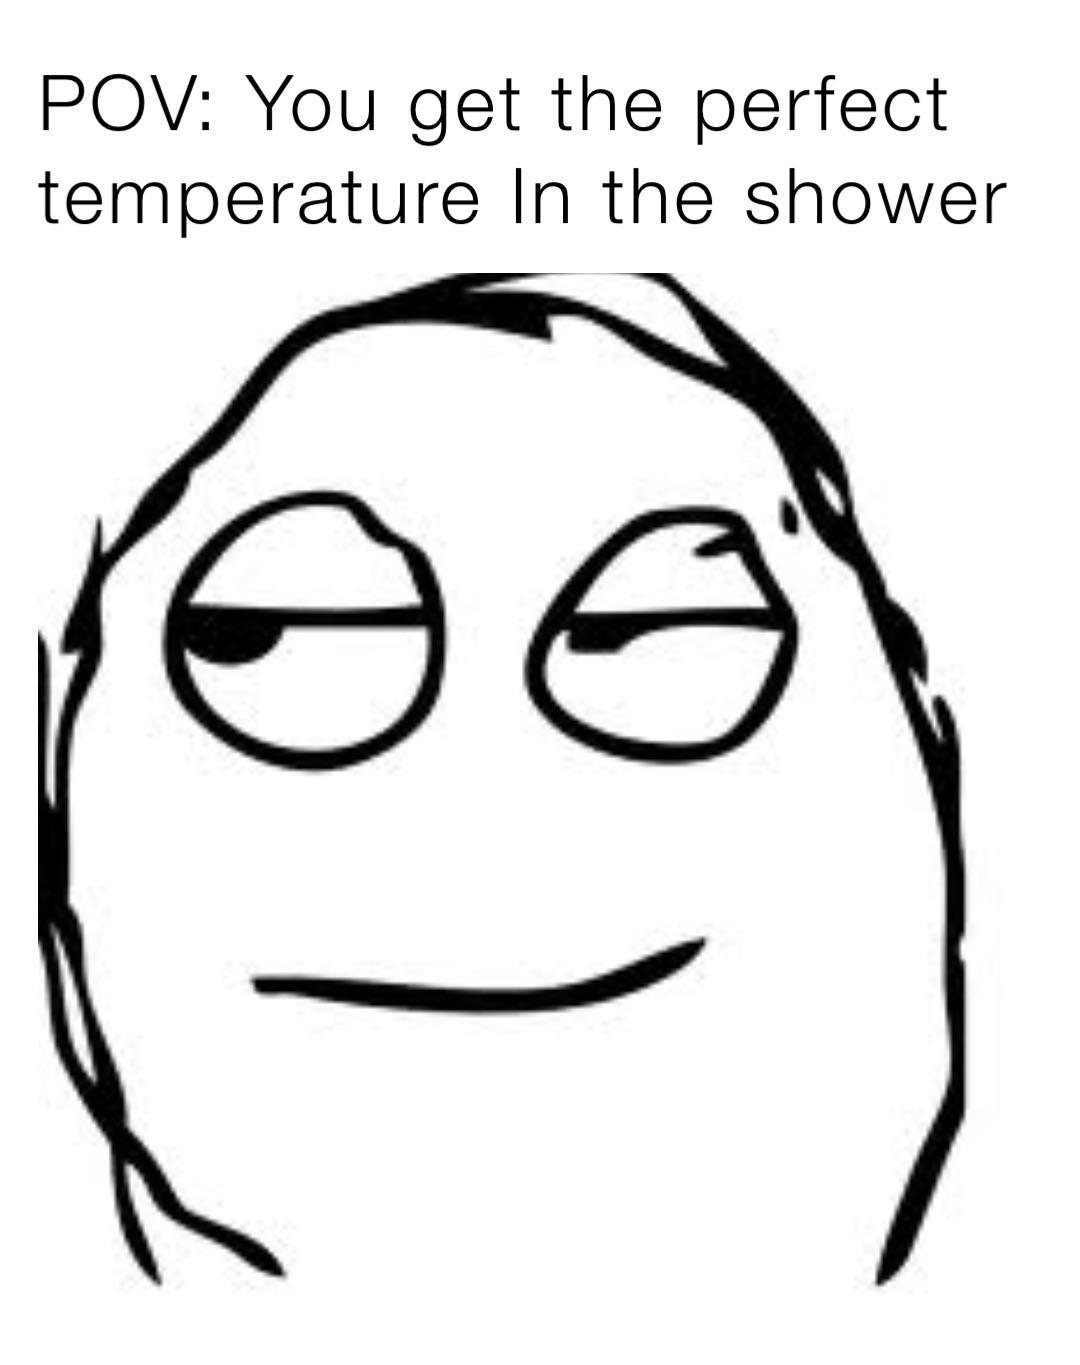 POV: You get the perfect temperature In the shower